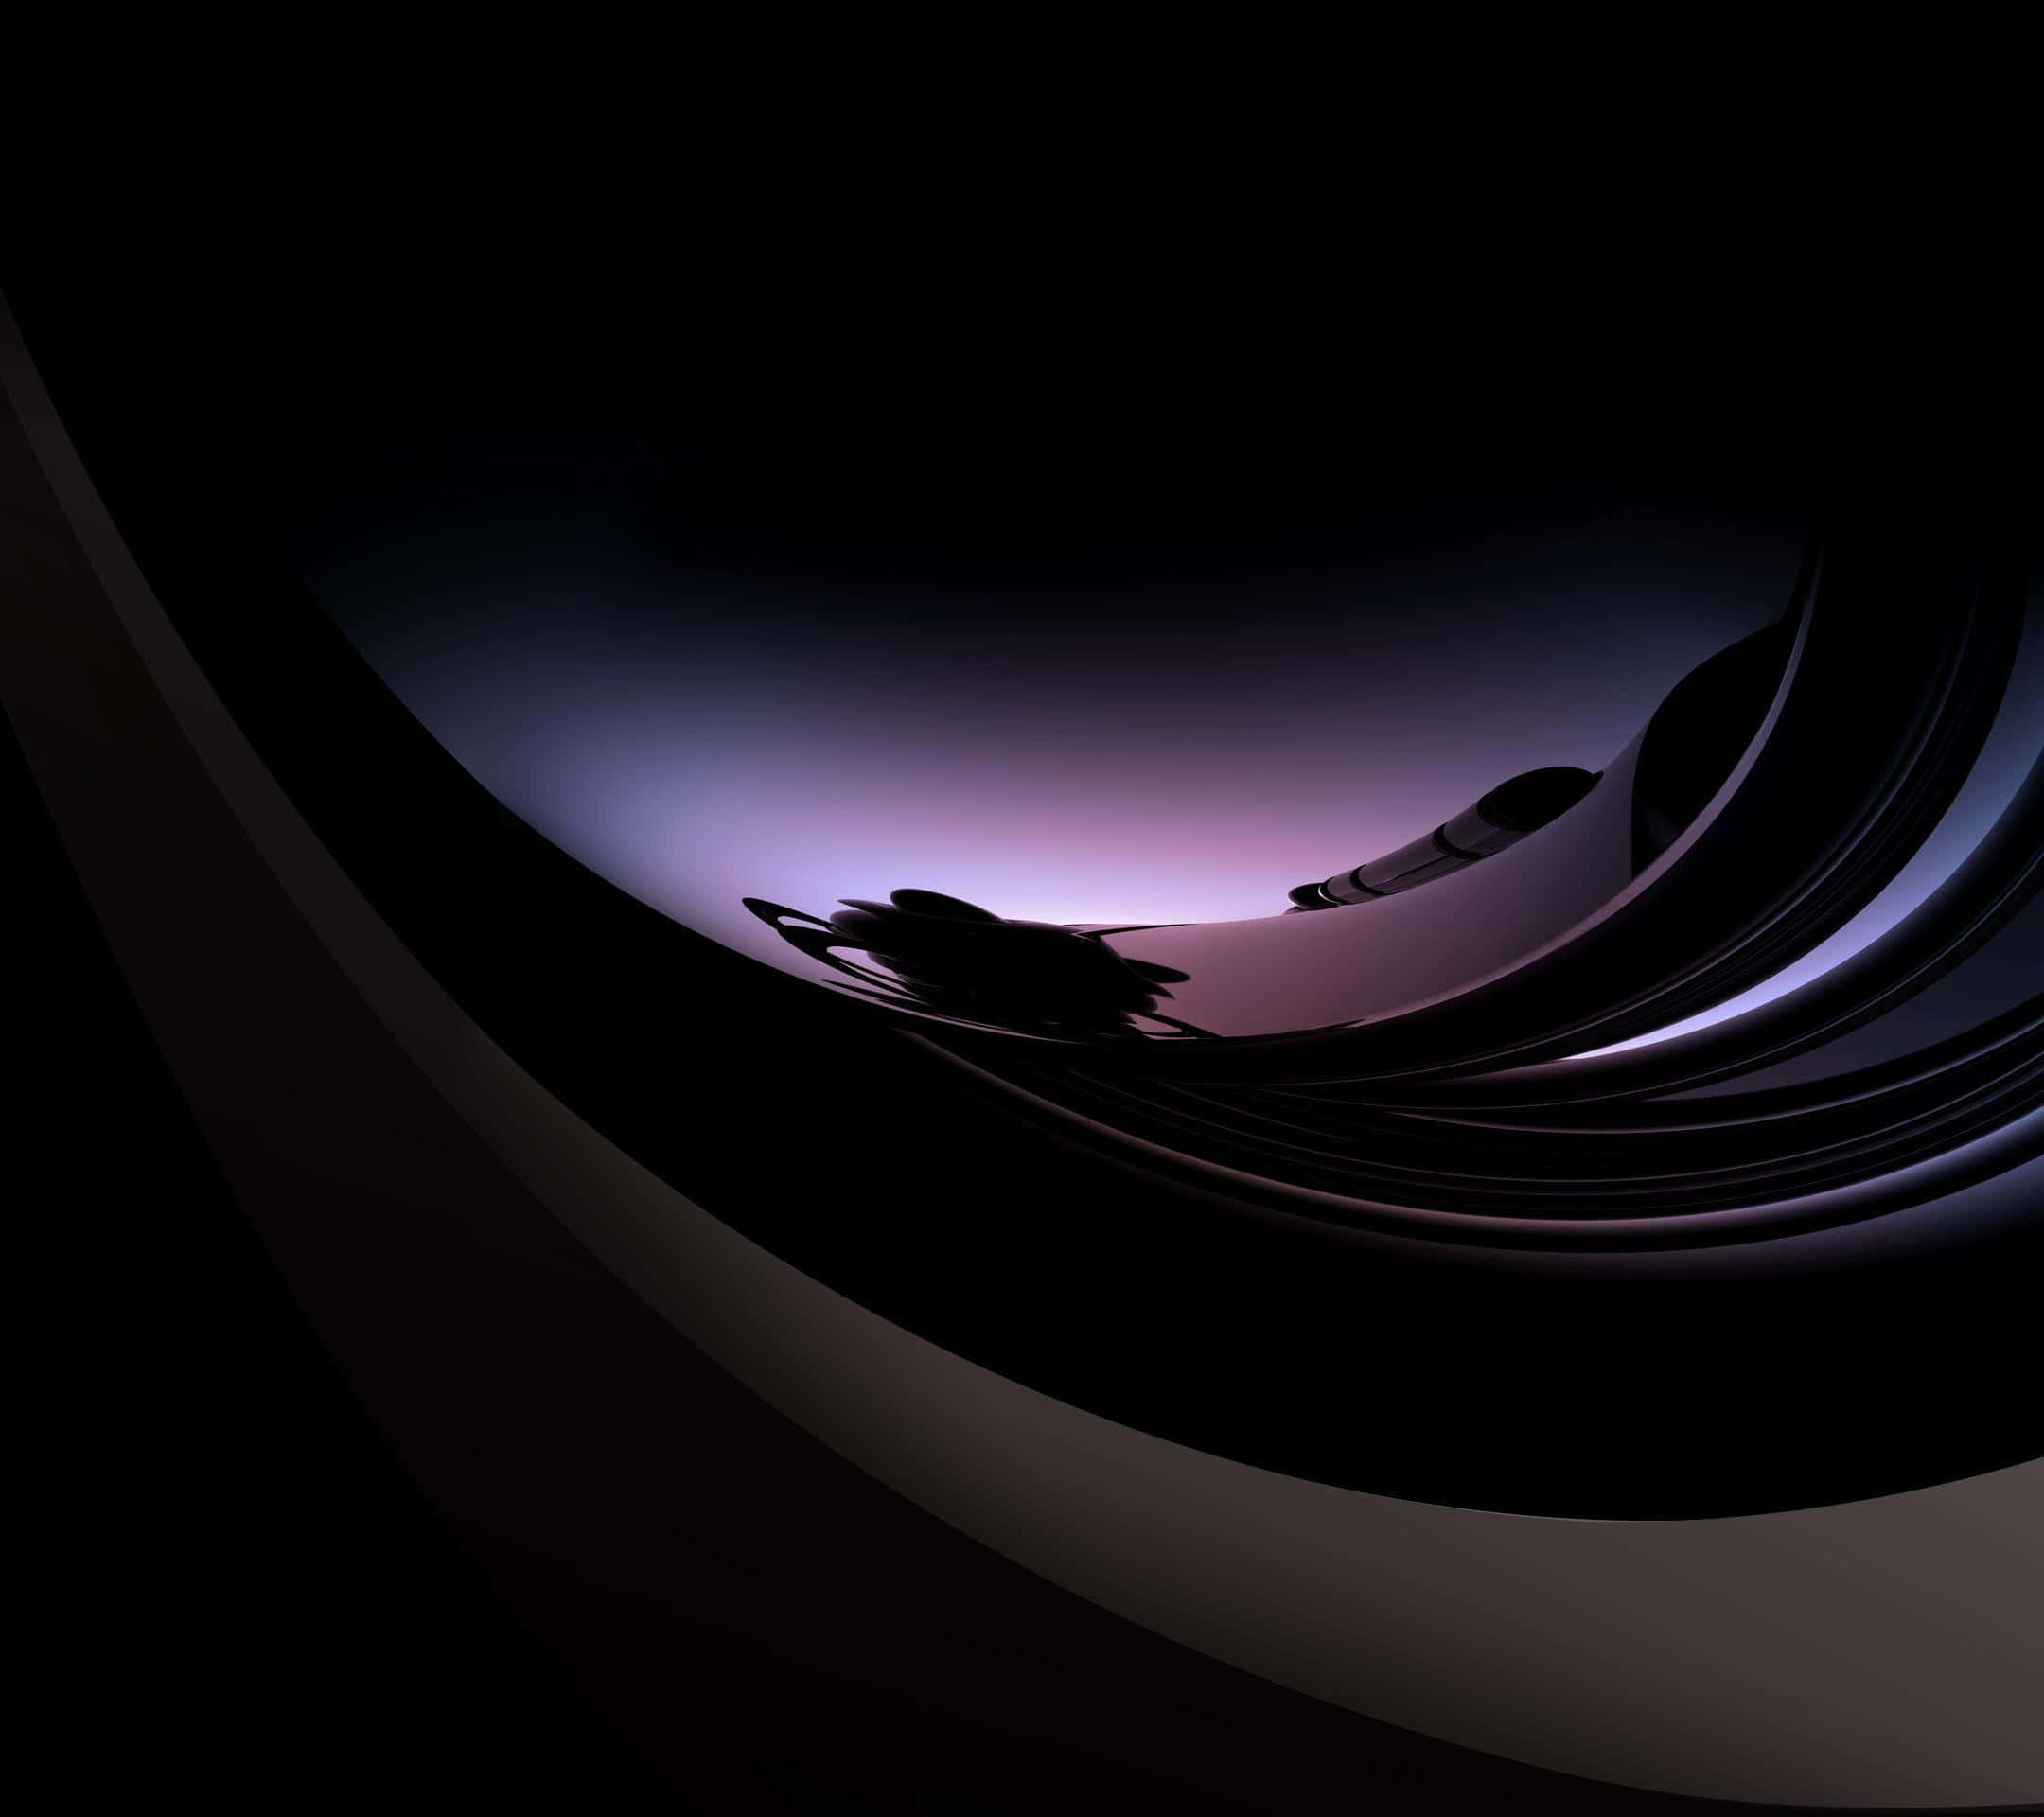 A Black And Purple Abstract Image Of A Wave